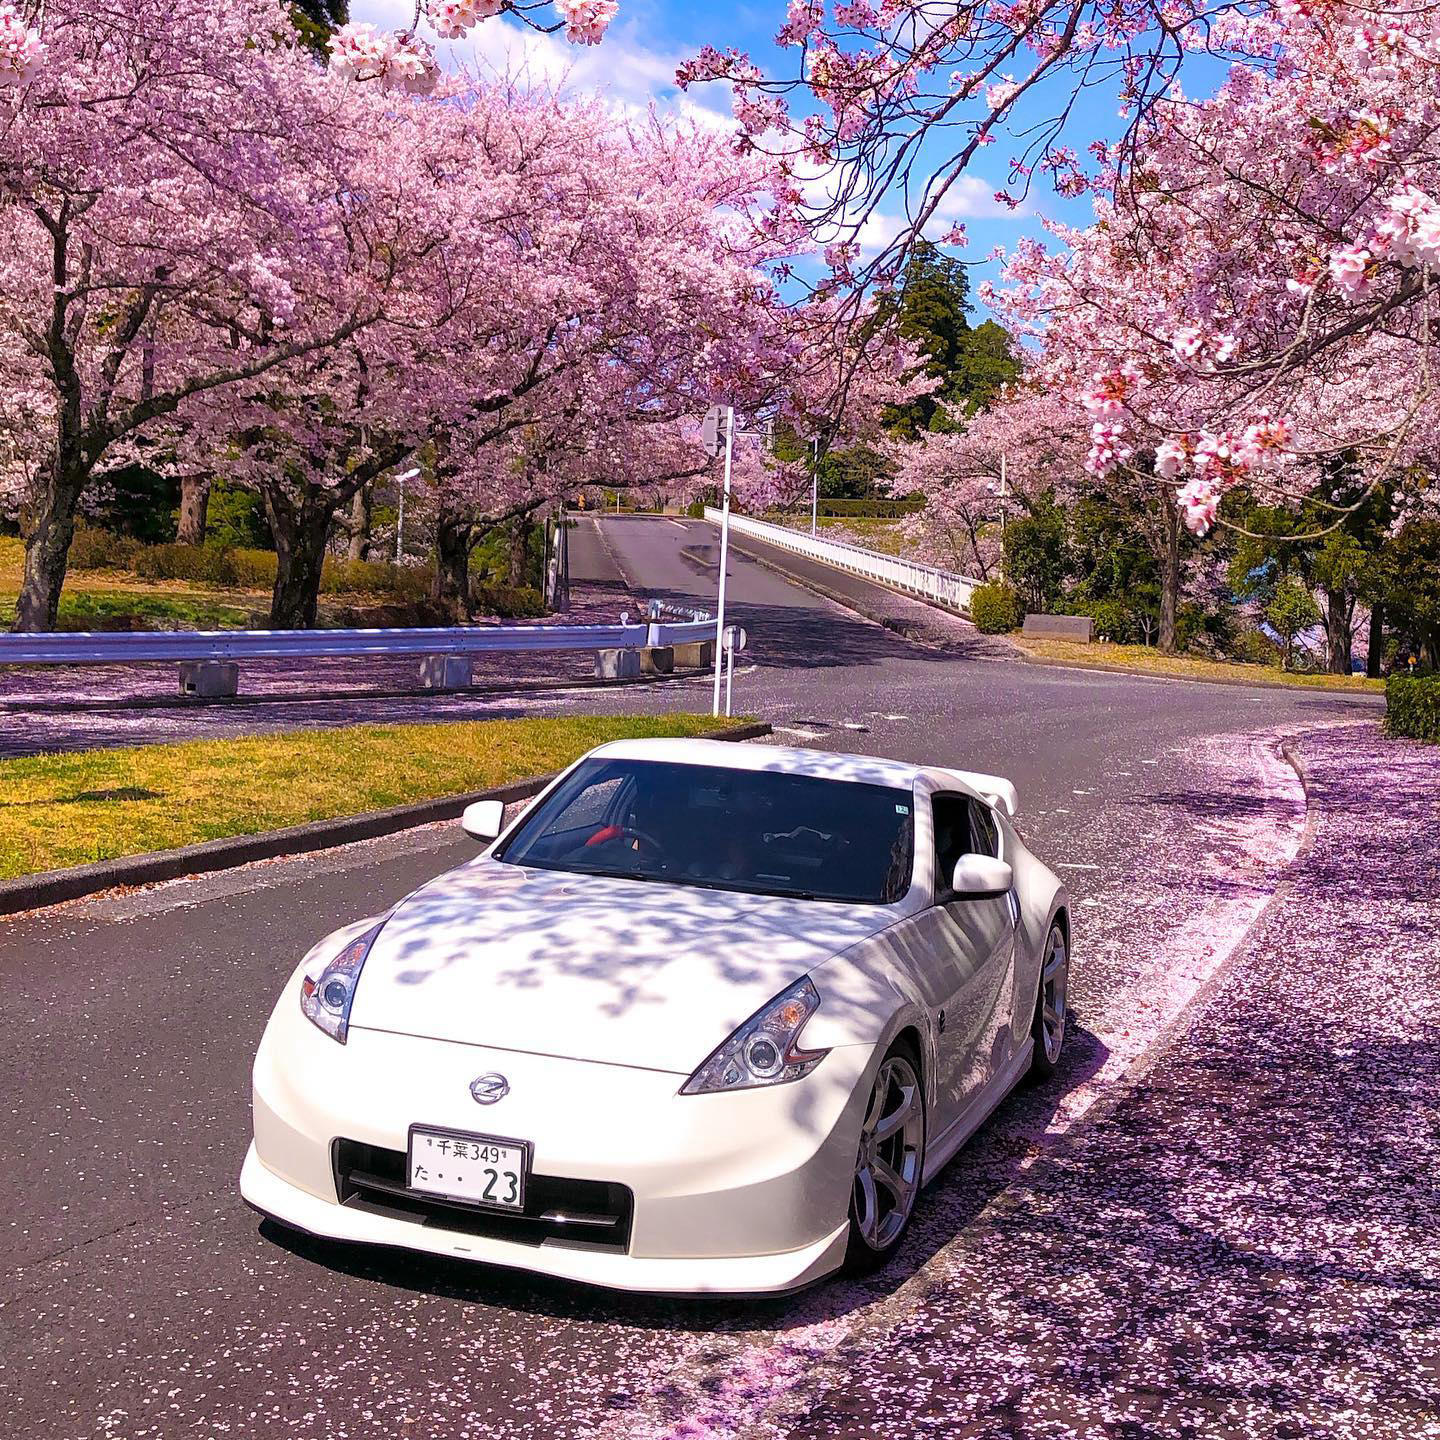 There’s nothing quite like spring in Japan